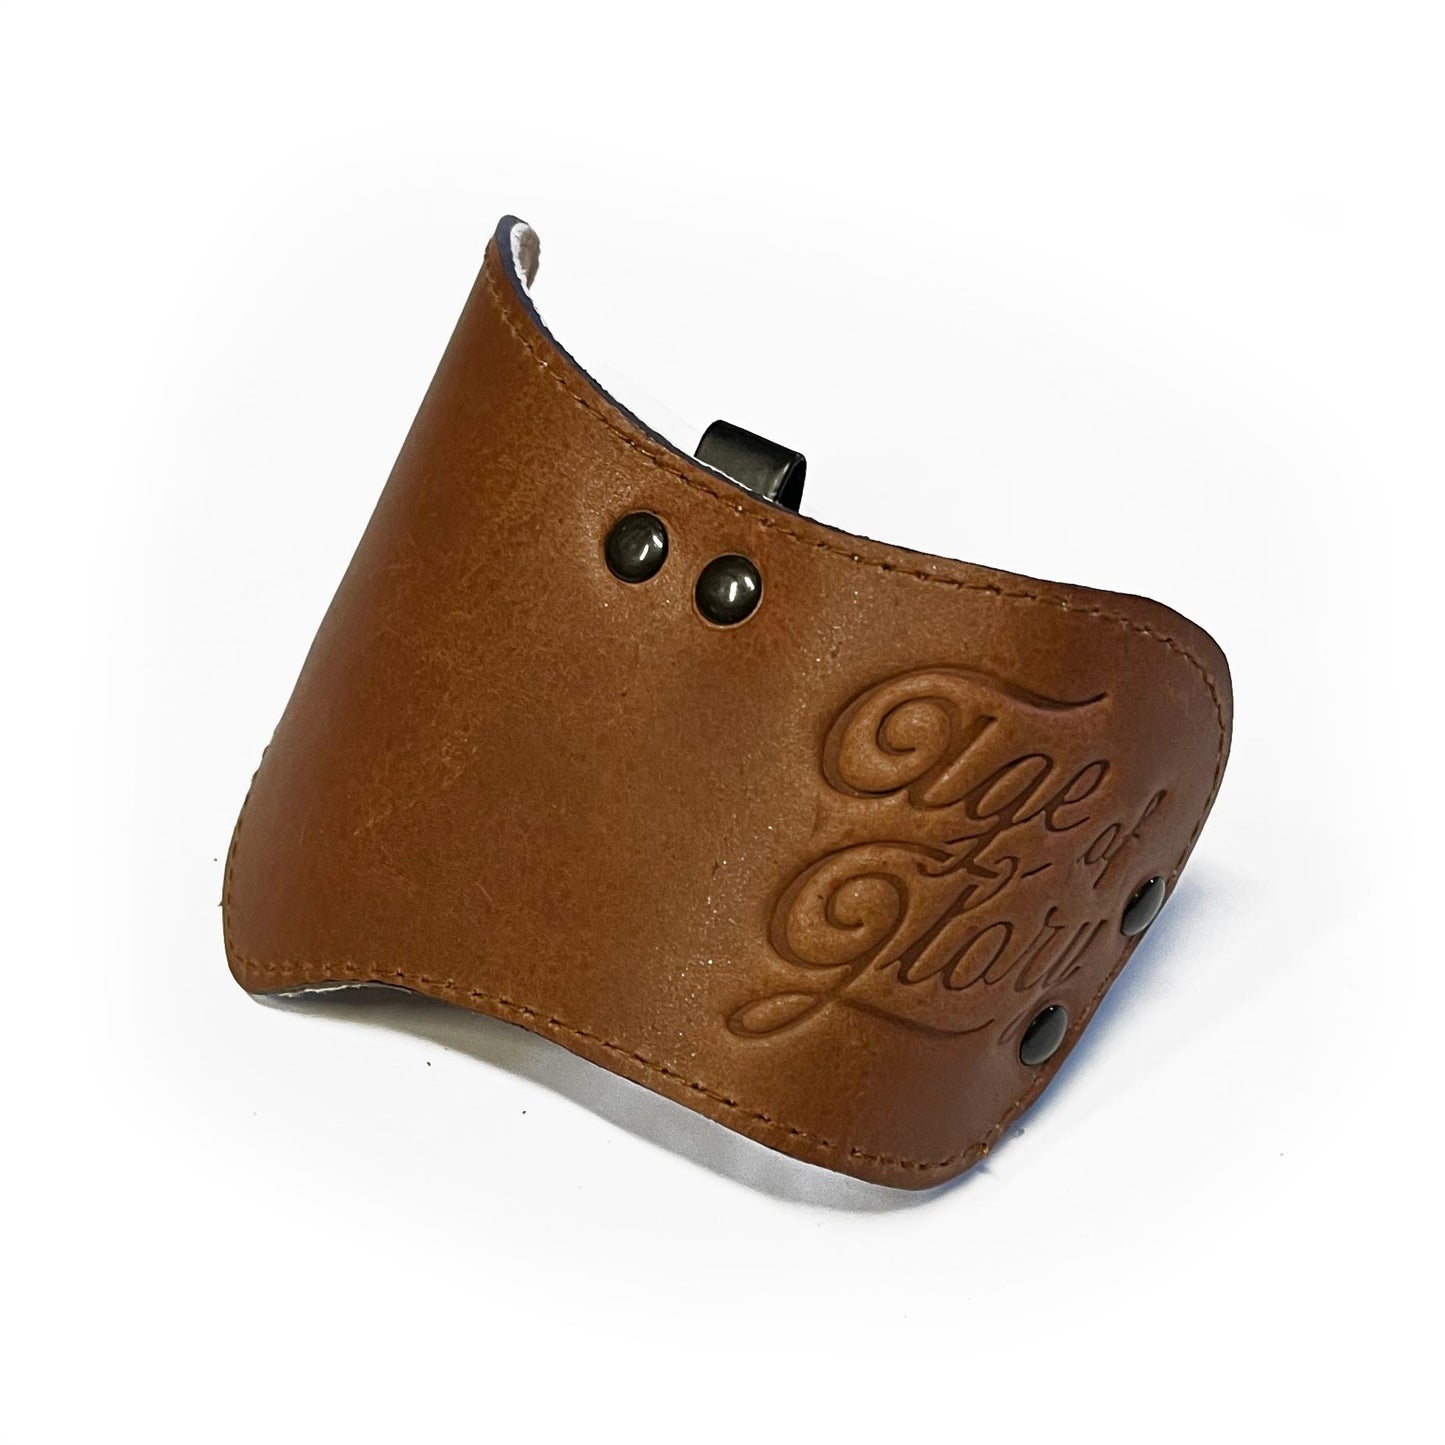 Age of Glory Shoe Leather Protector - Whiskey